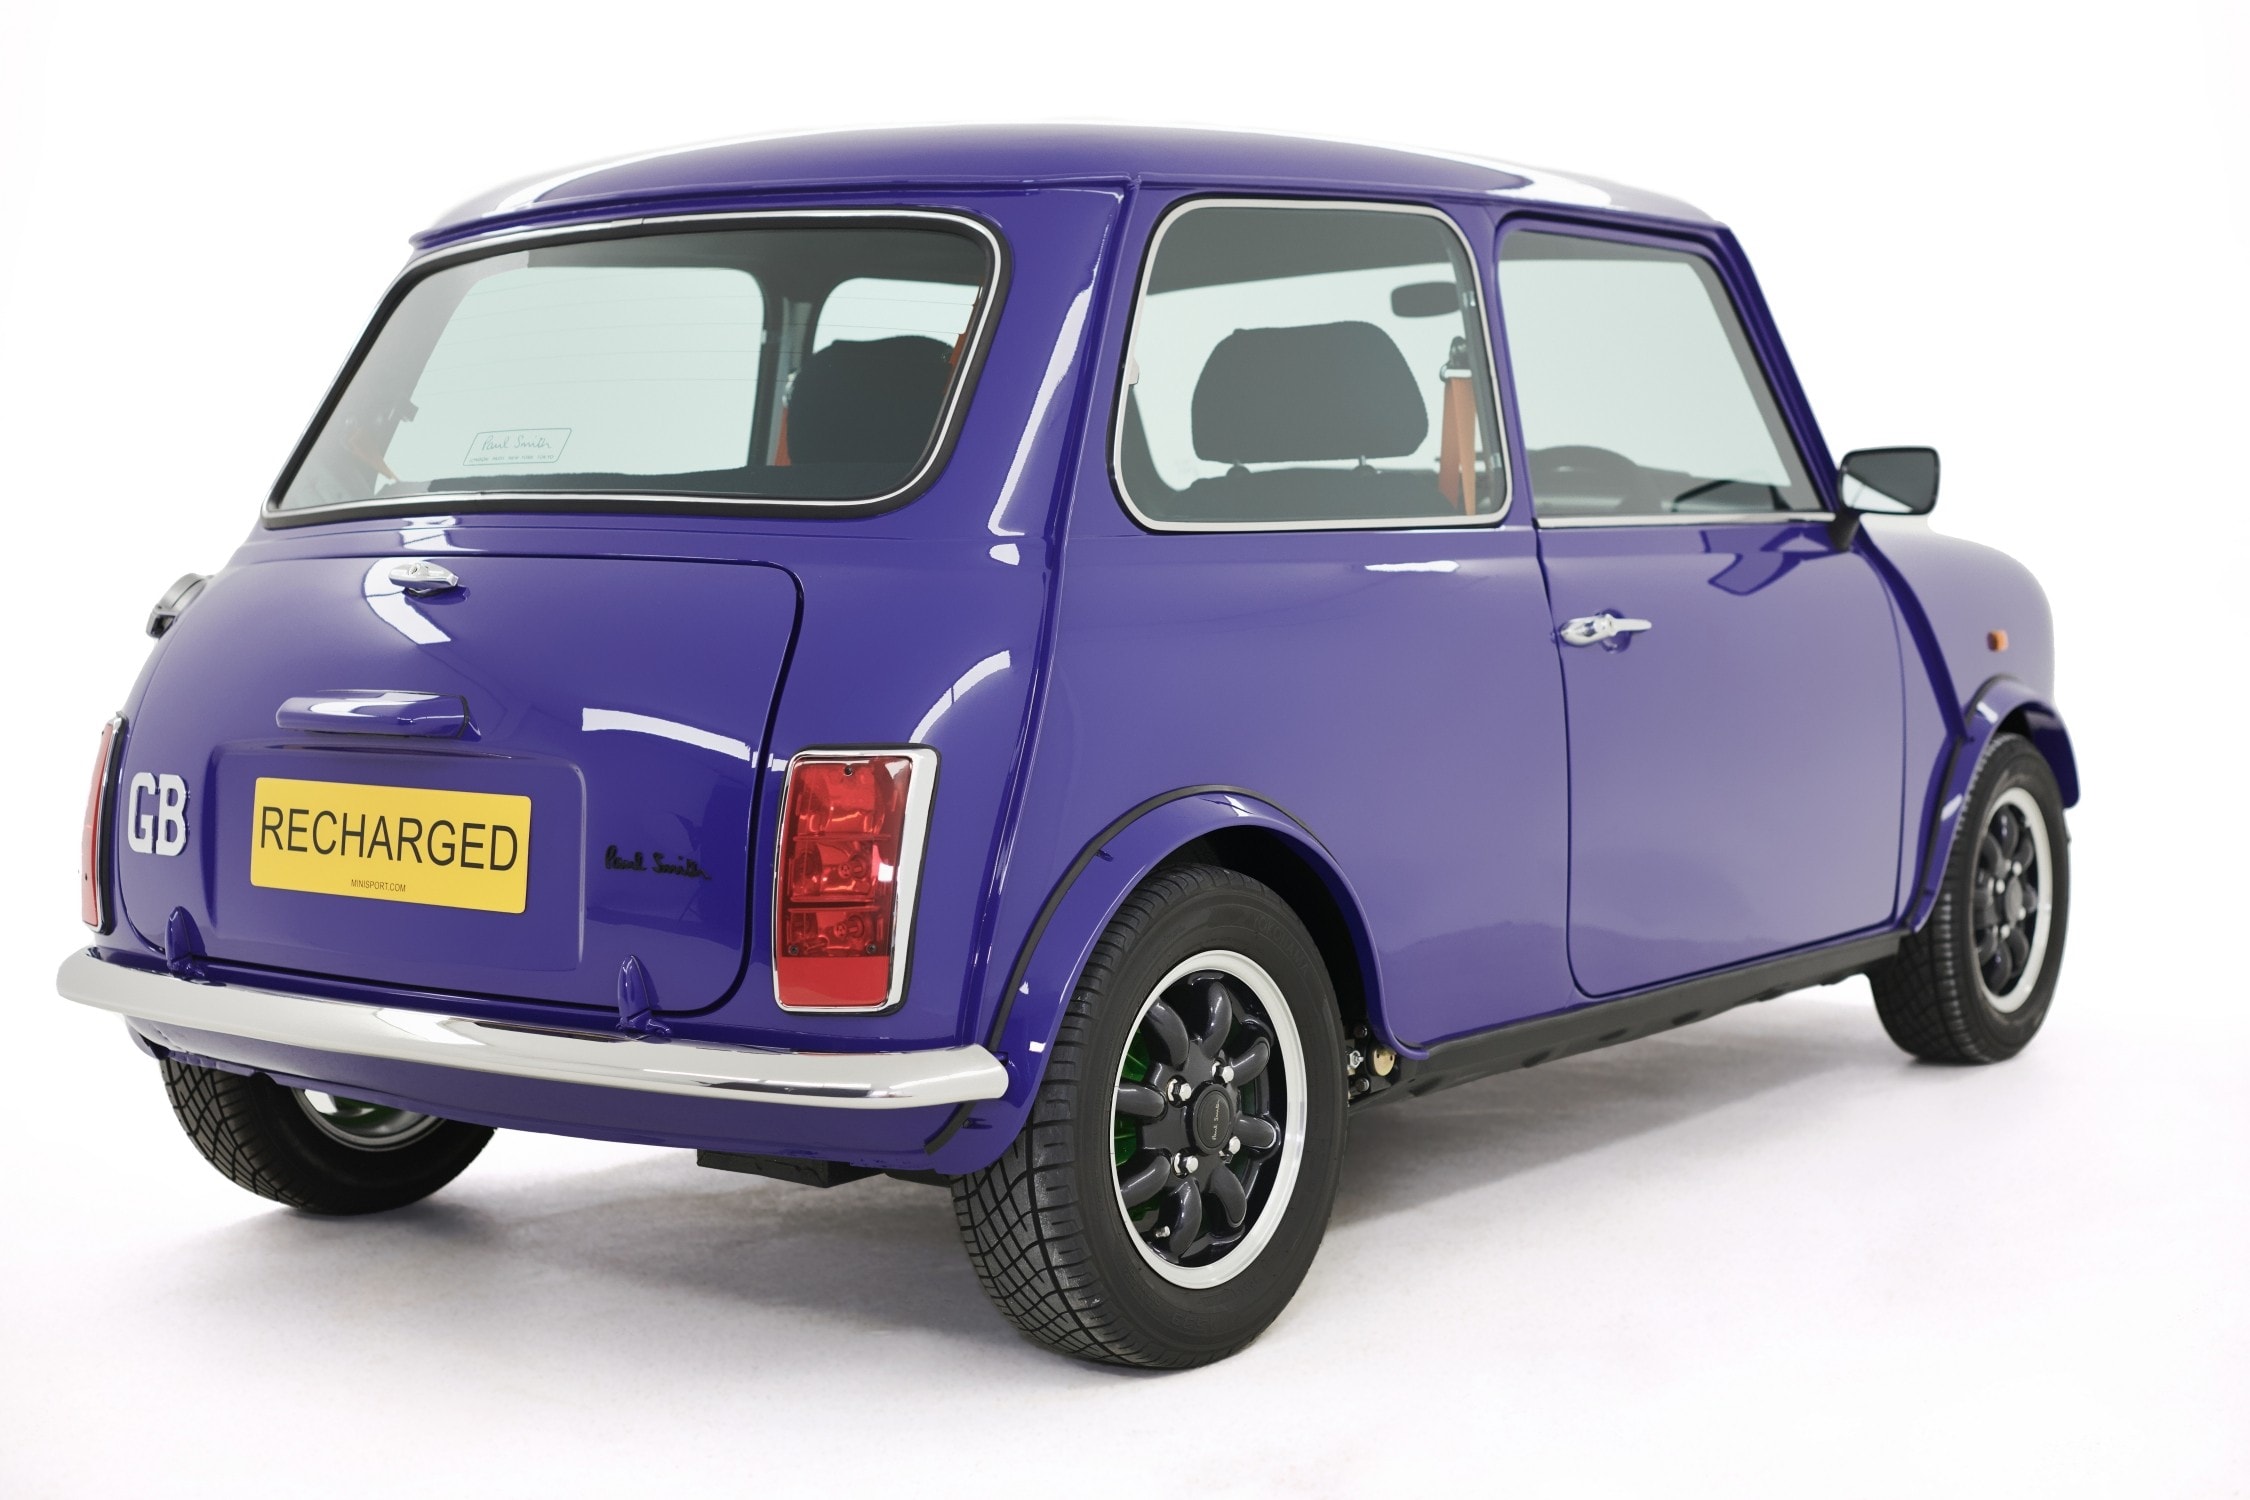 Paul Smith describes the recharged MINI model using three words - quality, sustainability and functionality.